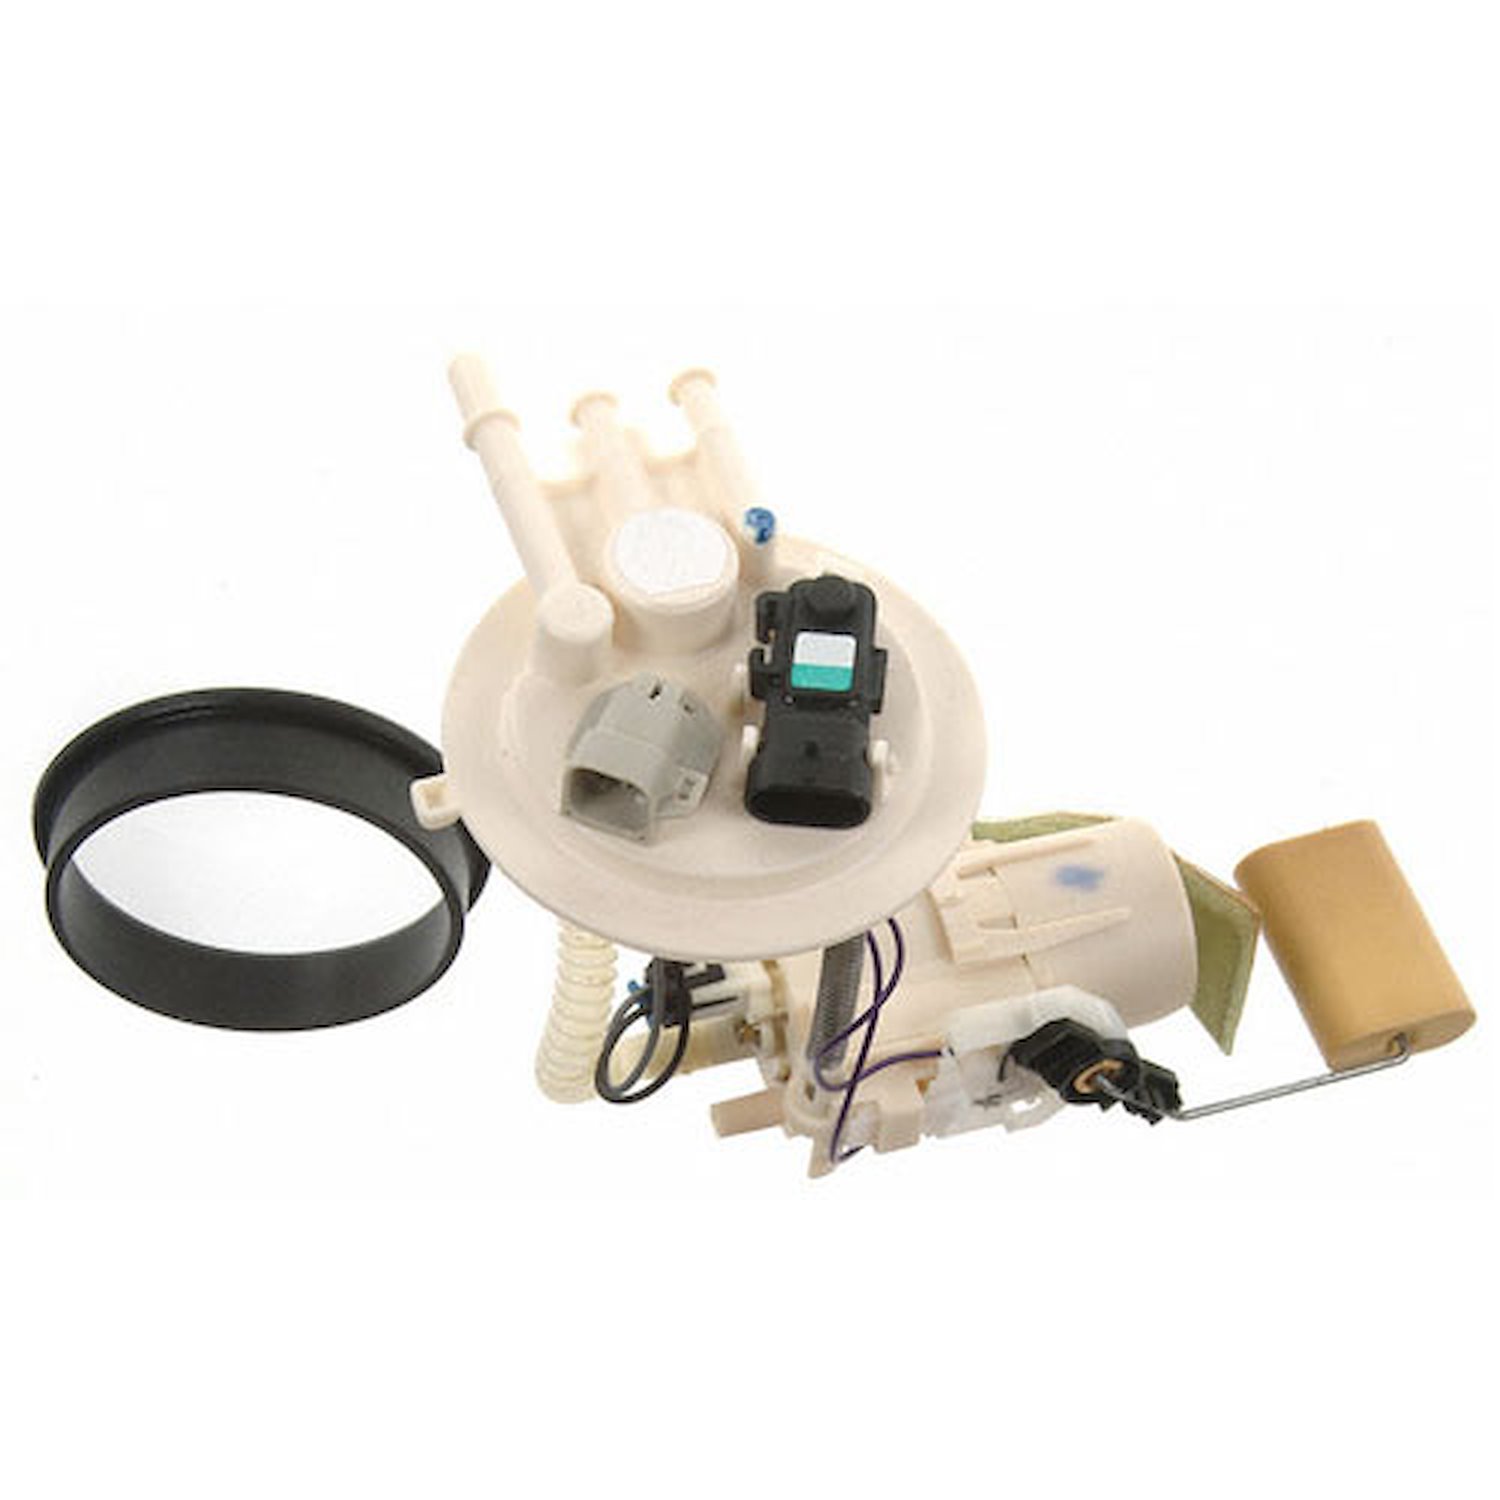 OE GM Replacement Electric Fuel Pump Module Assembly 2000-01 Chevrolet Suburban 2500 6.0L/8.1L V8